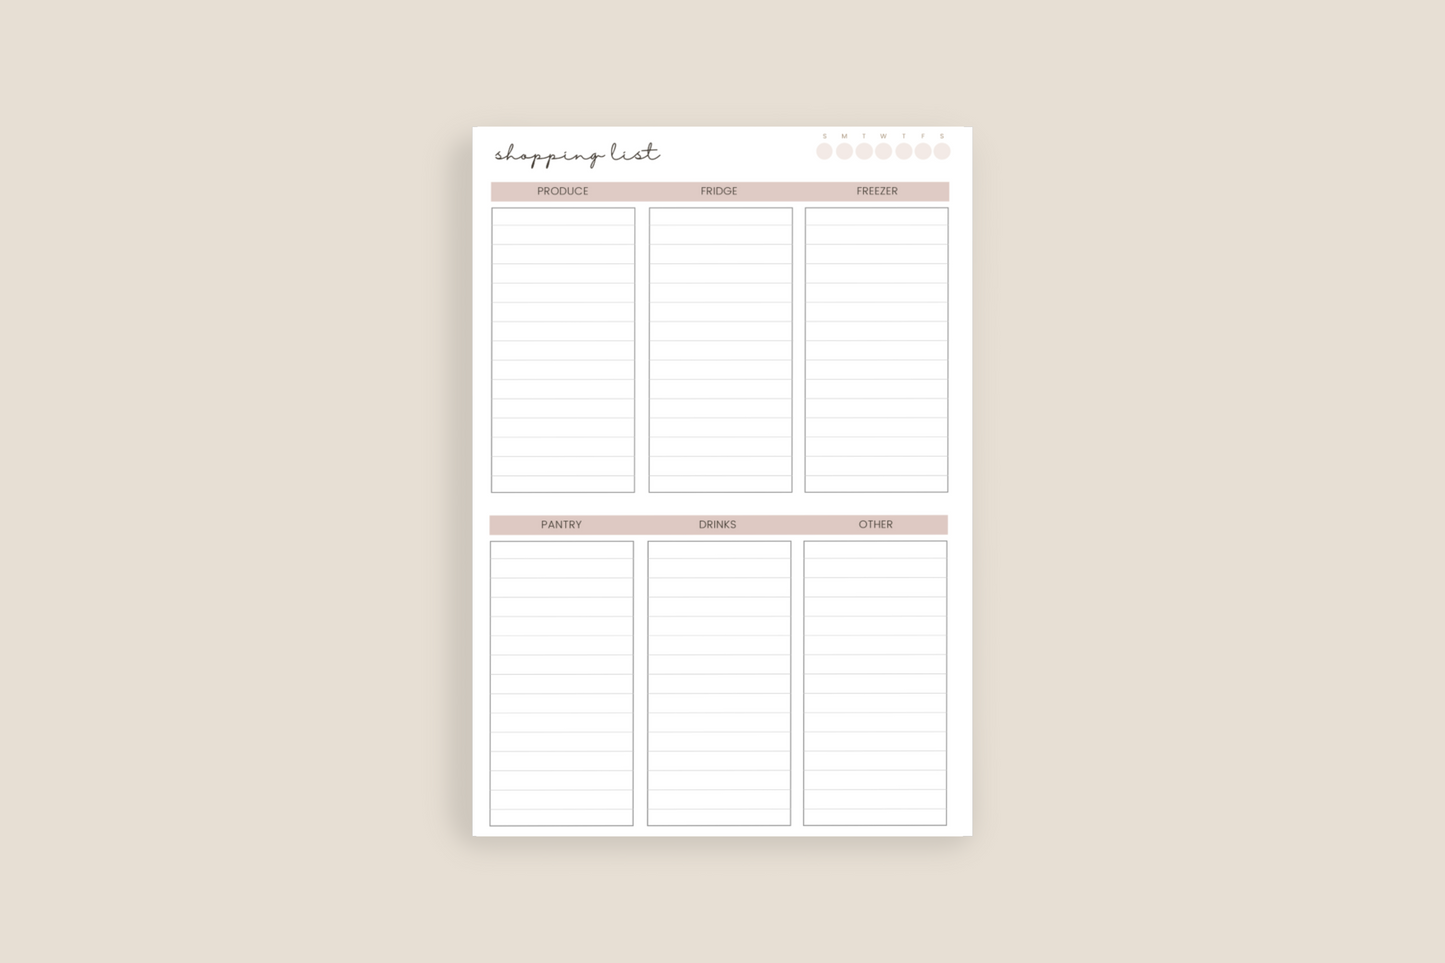 GROCERY LIST NOTEPAD